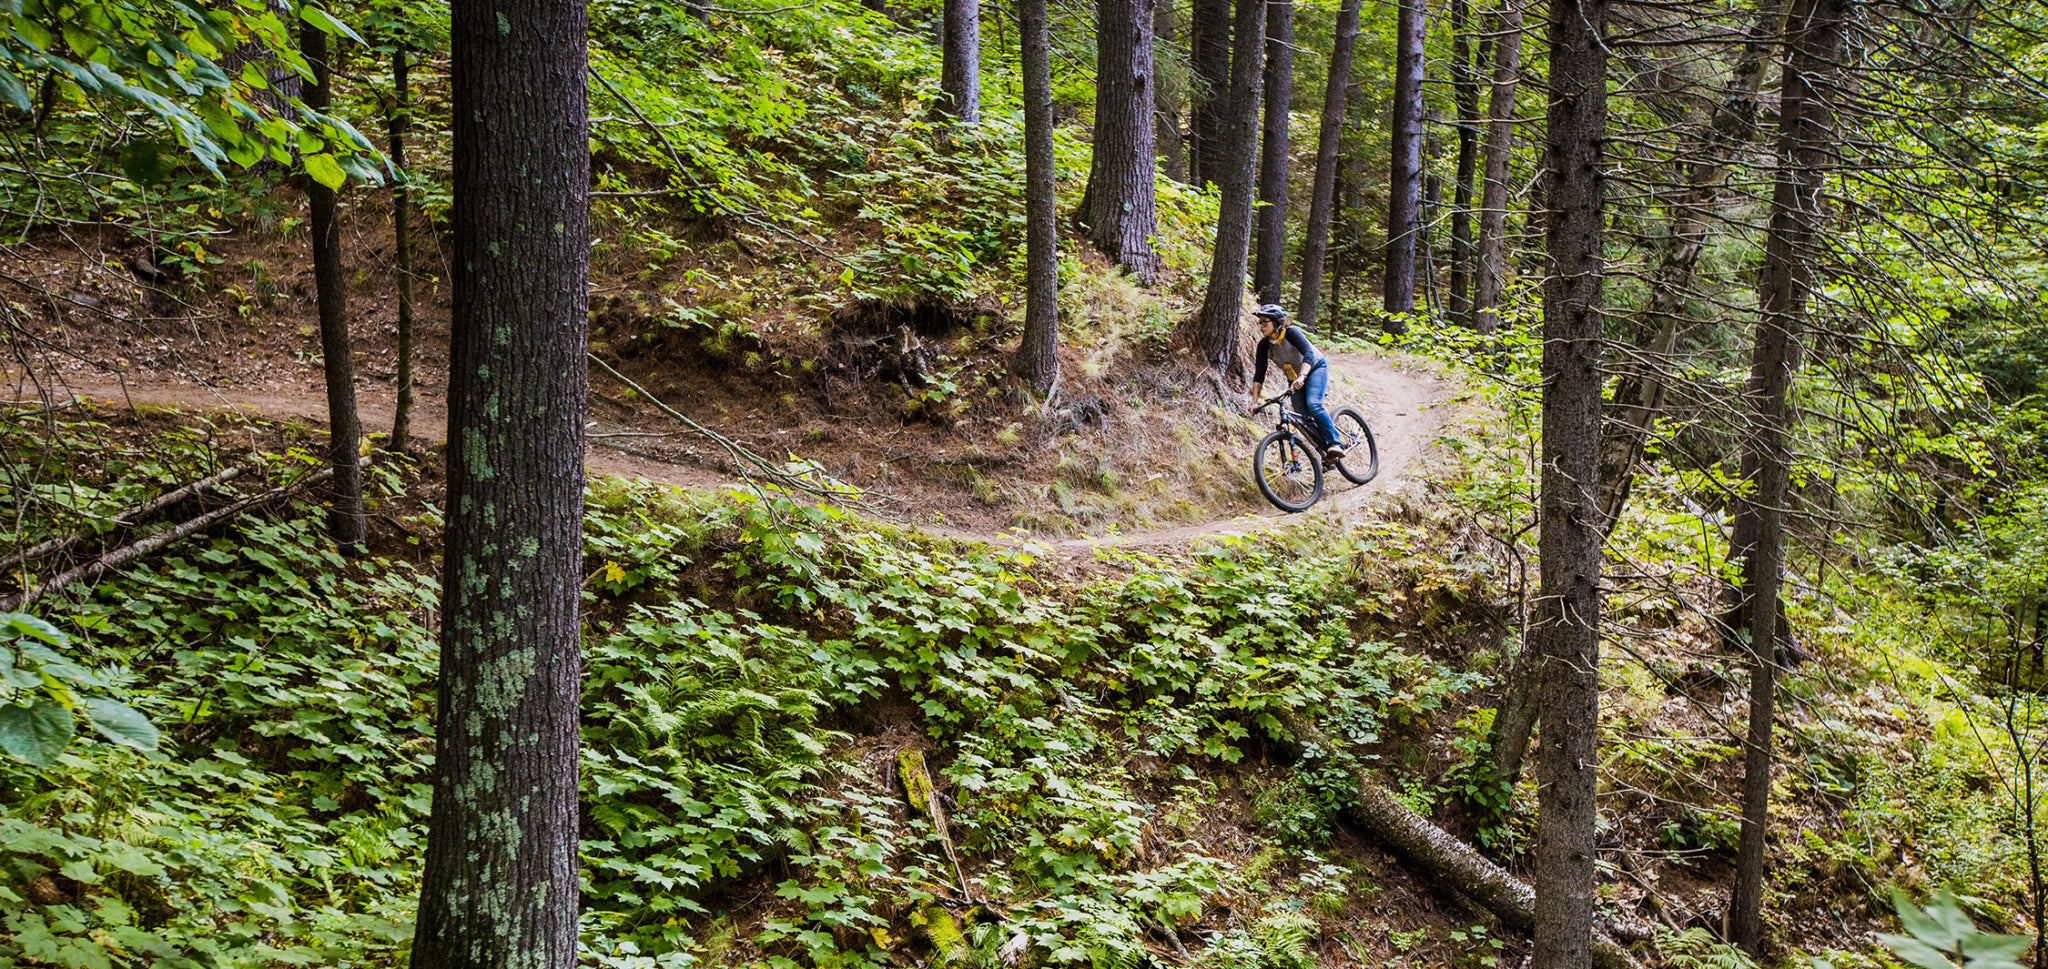 Names matter. Alexandera pedals through the greenery on the Akiing Anishinaabe trail, an Ojibwemowin name which translates to “Indigenous land,” in English. Duluth, Minnesota. Photo: Hansi Johnson